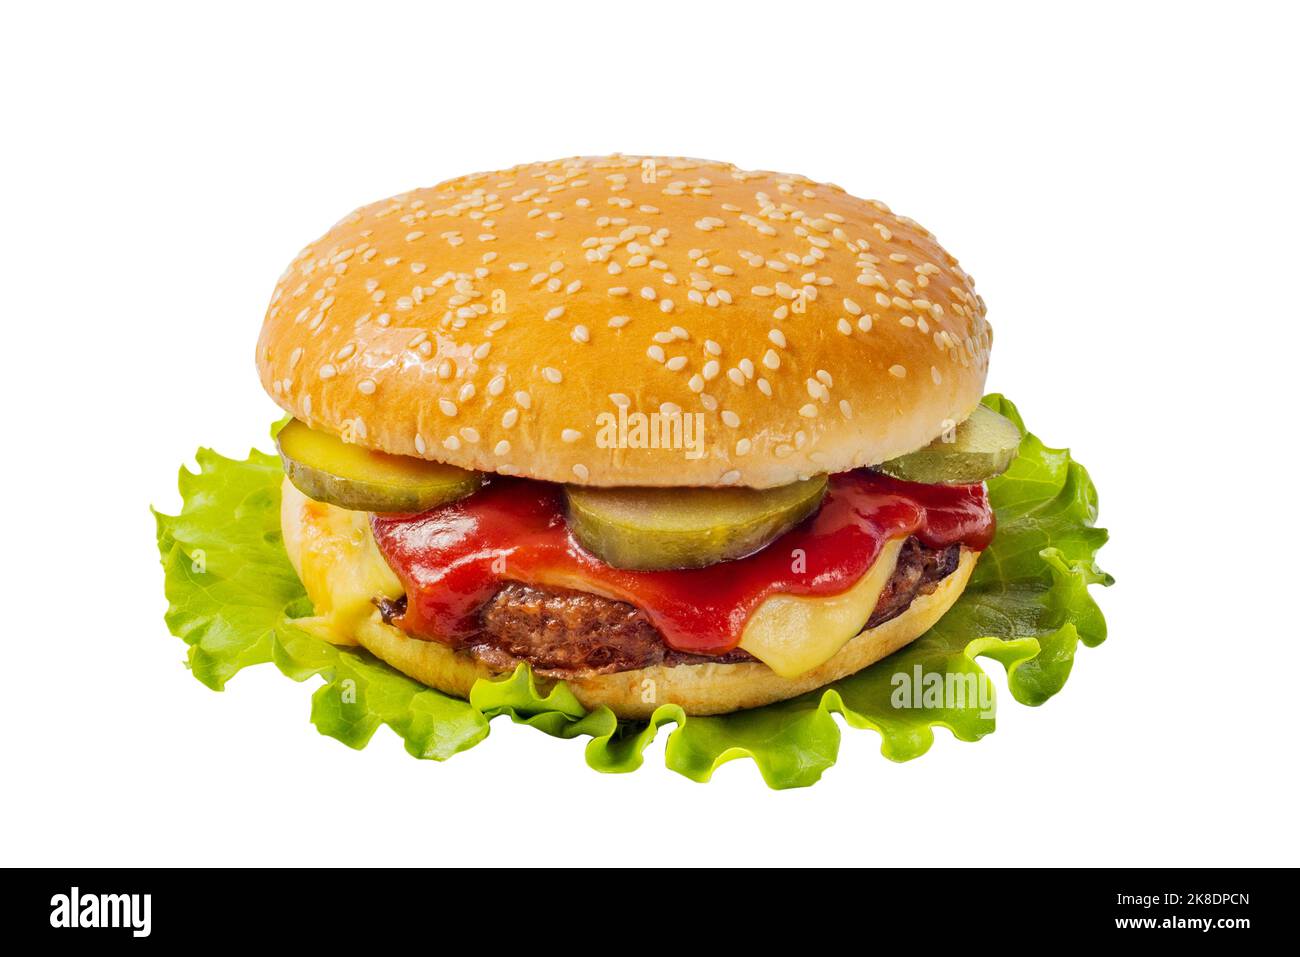 Grilled cheeseburger with pickles and sauces in a white sesame bun Stock Photo